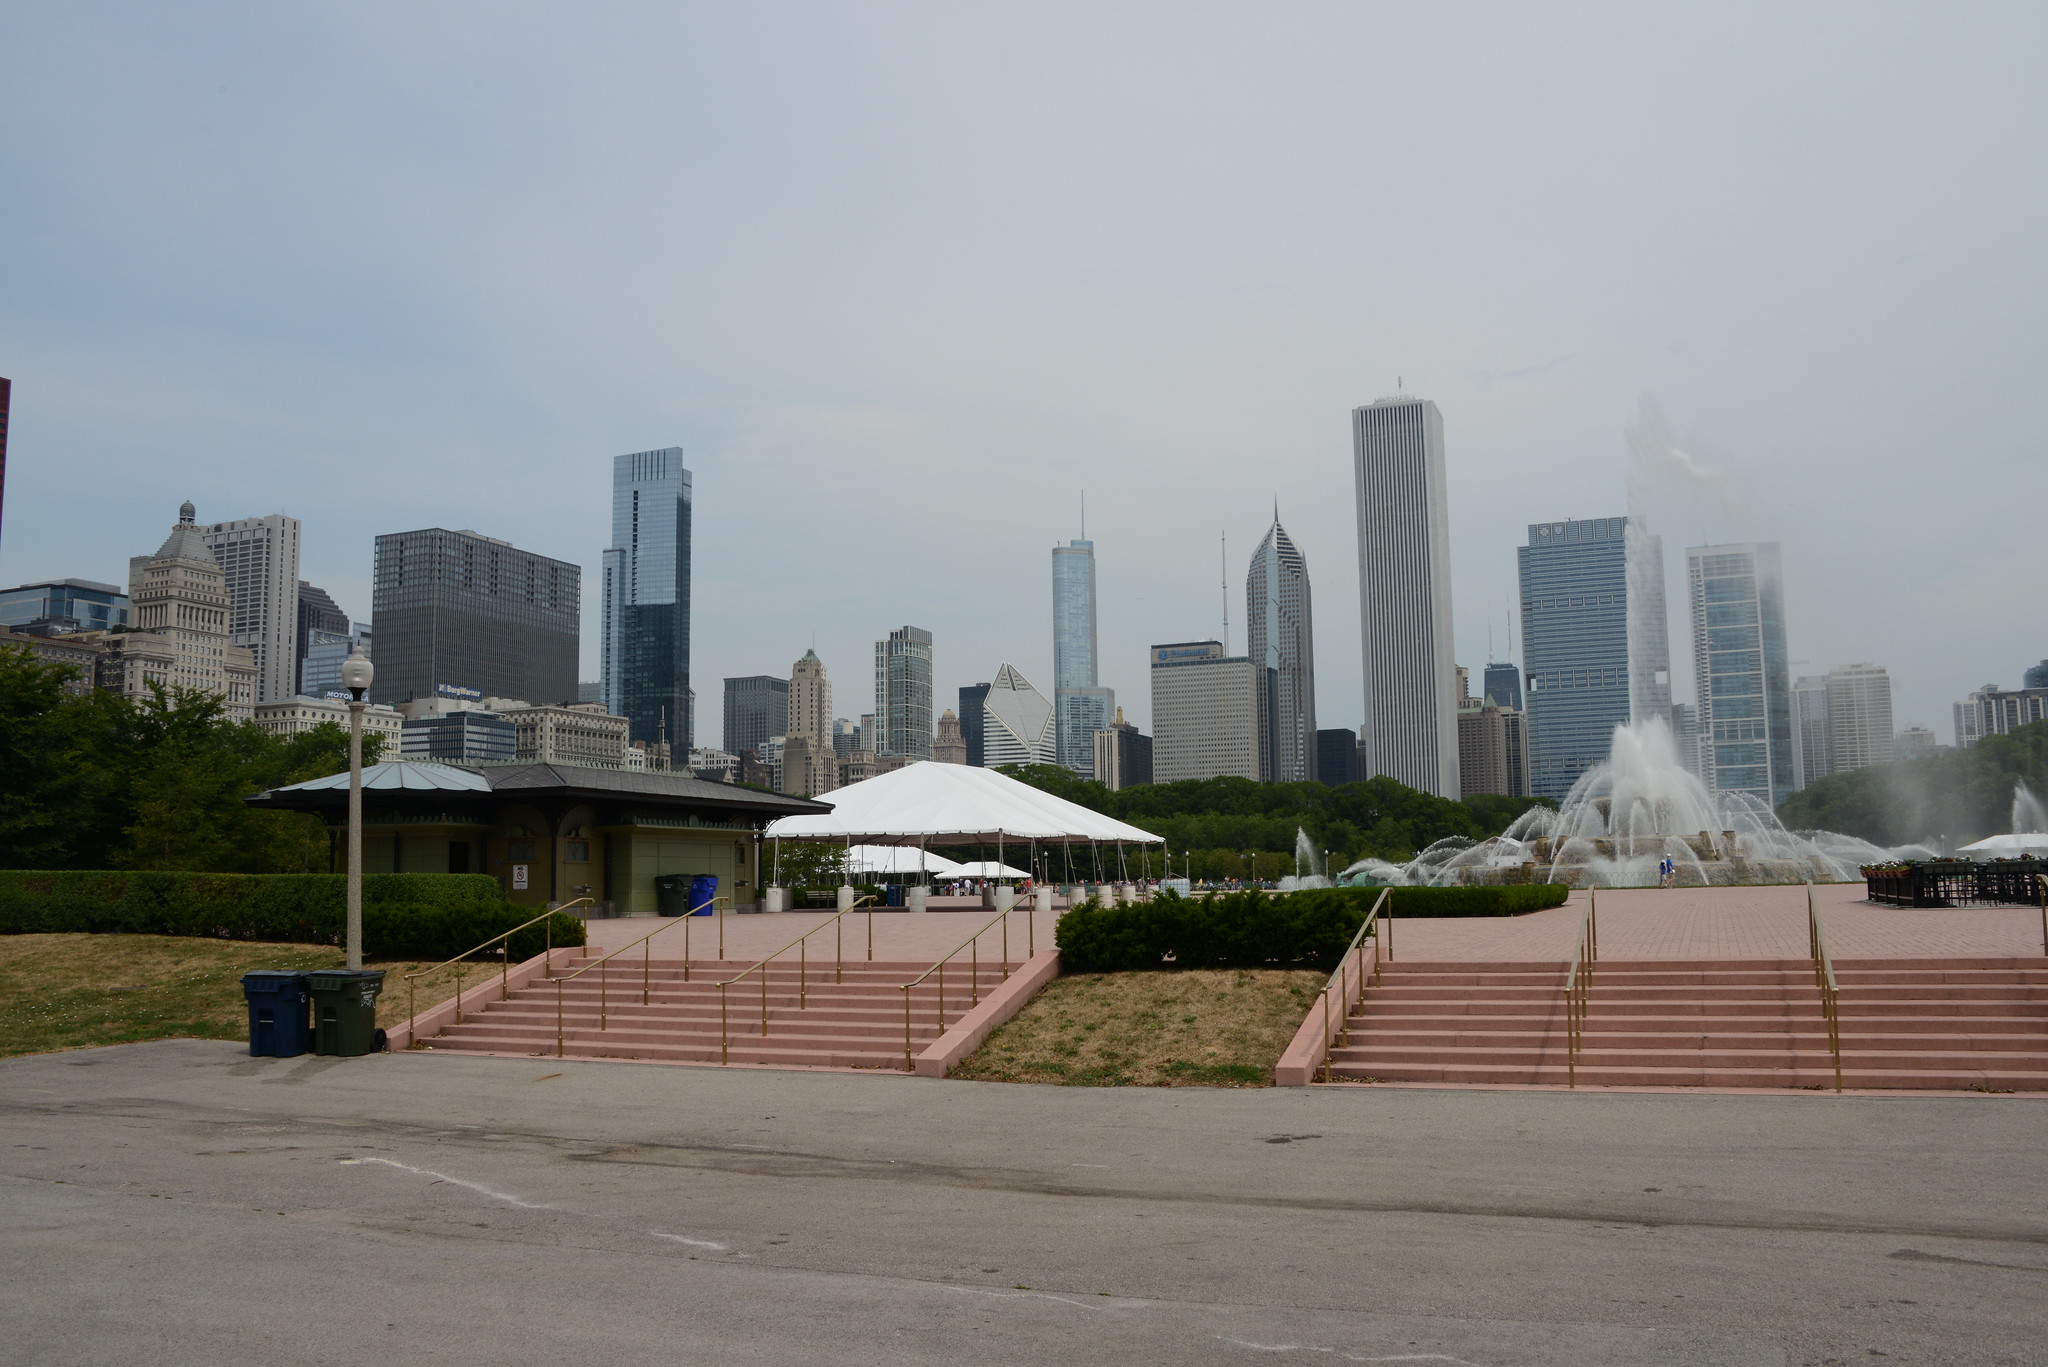 The skyline of Chicago seen from a Segway tour